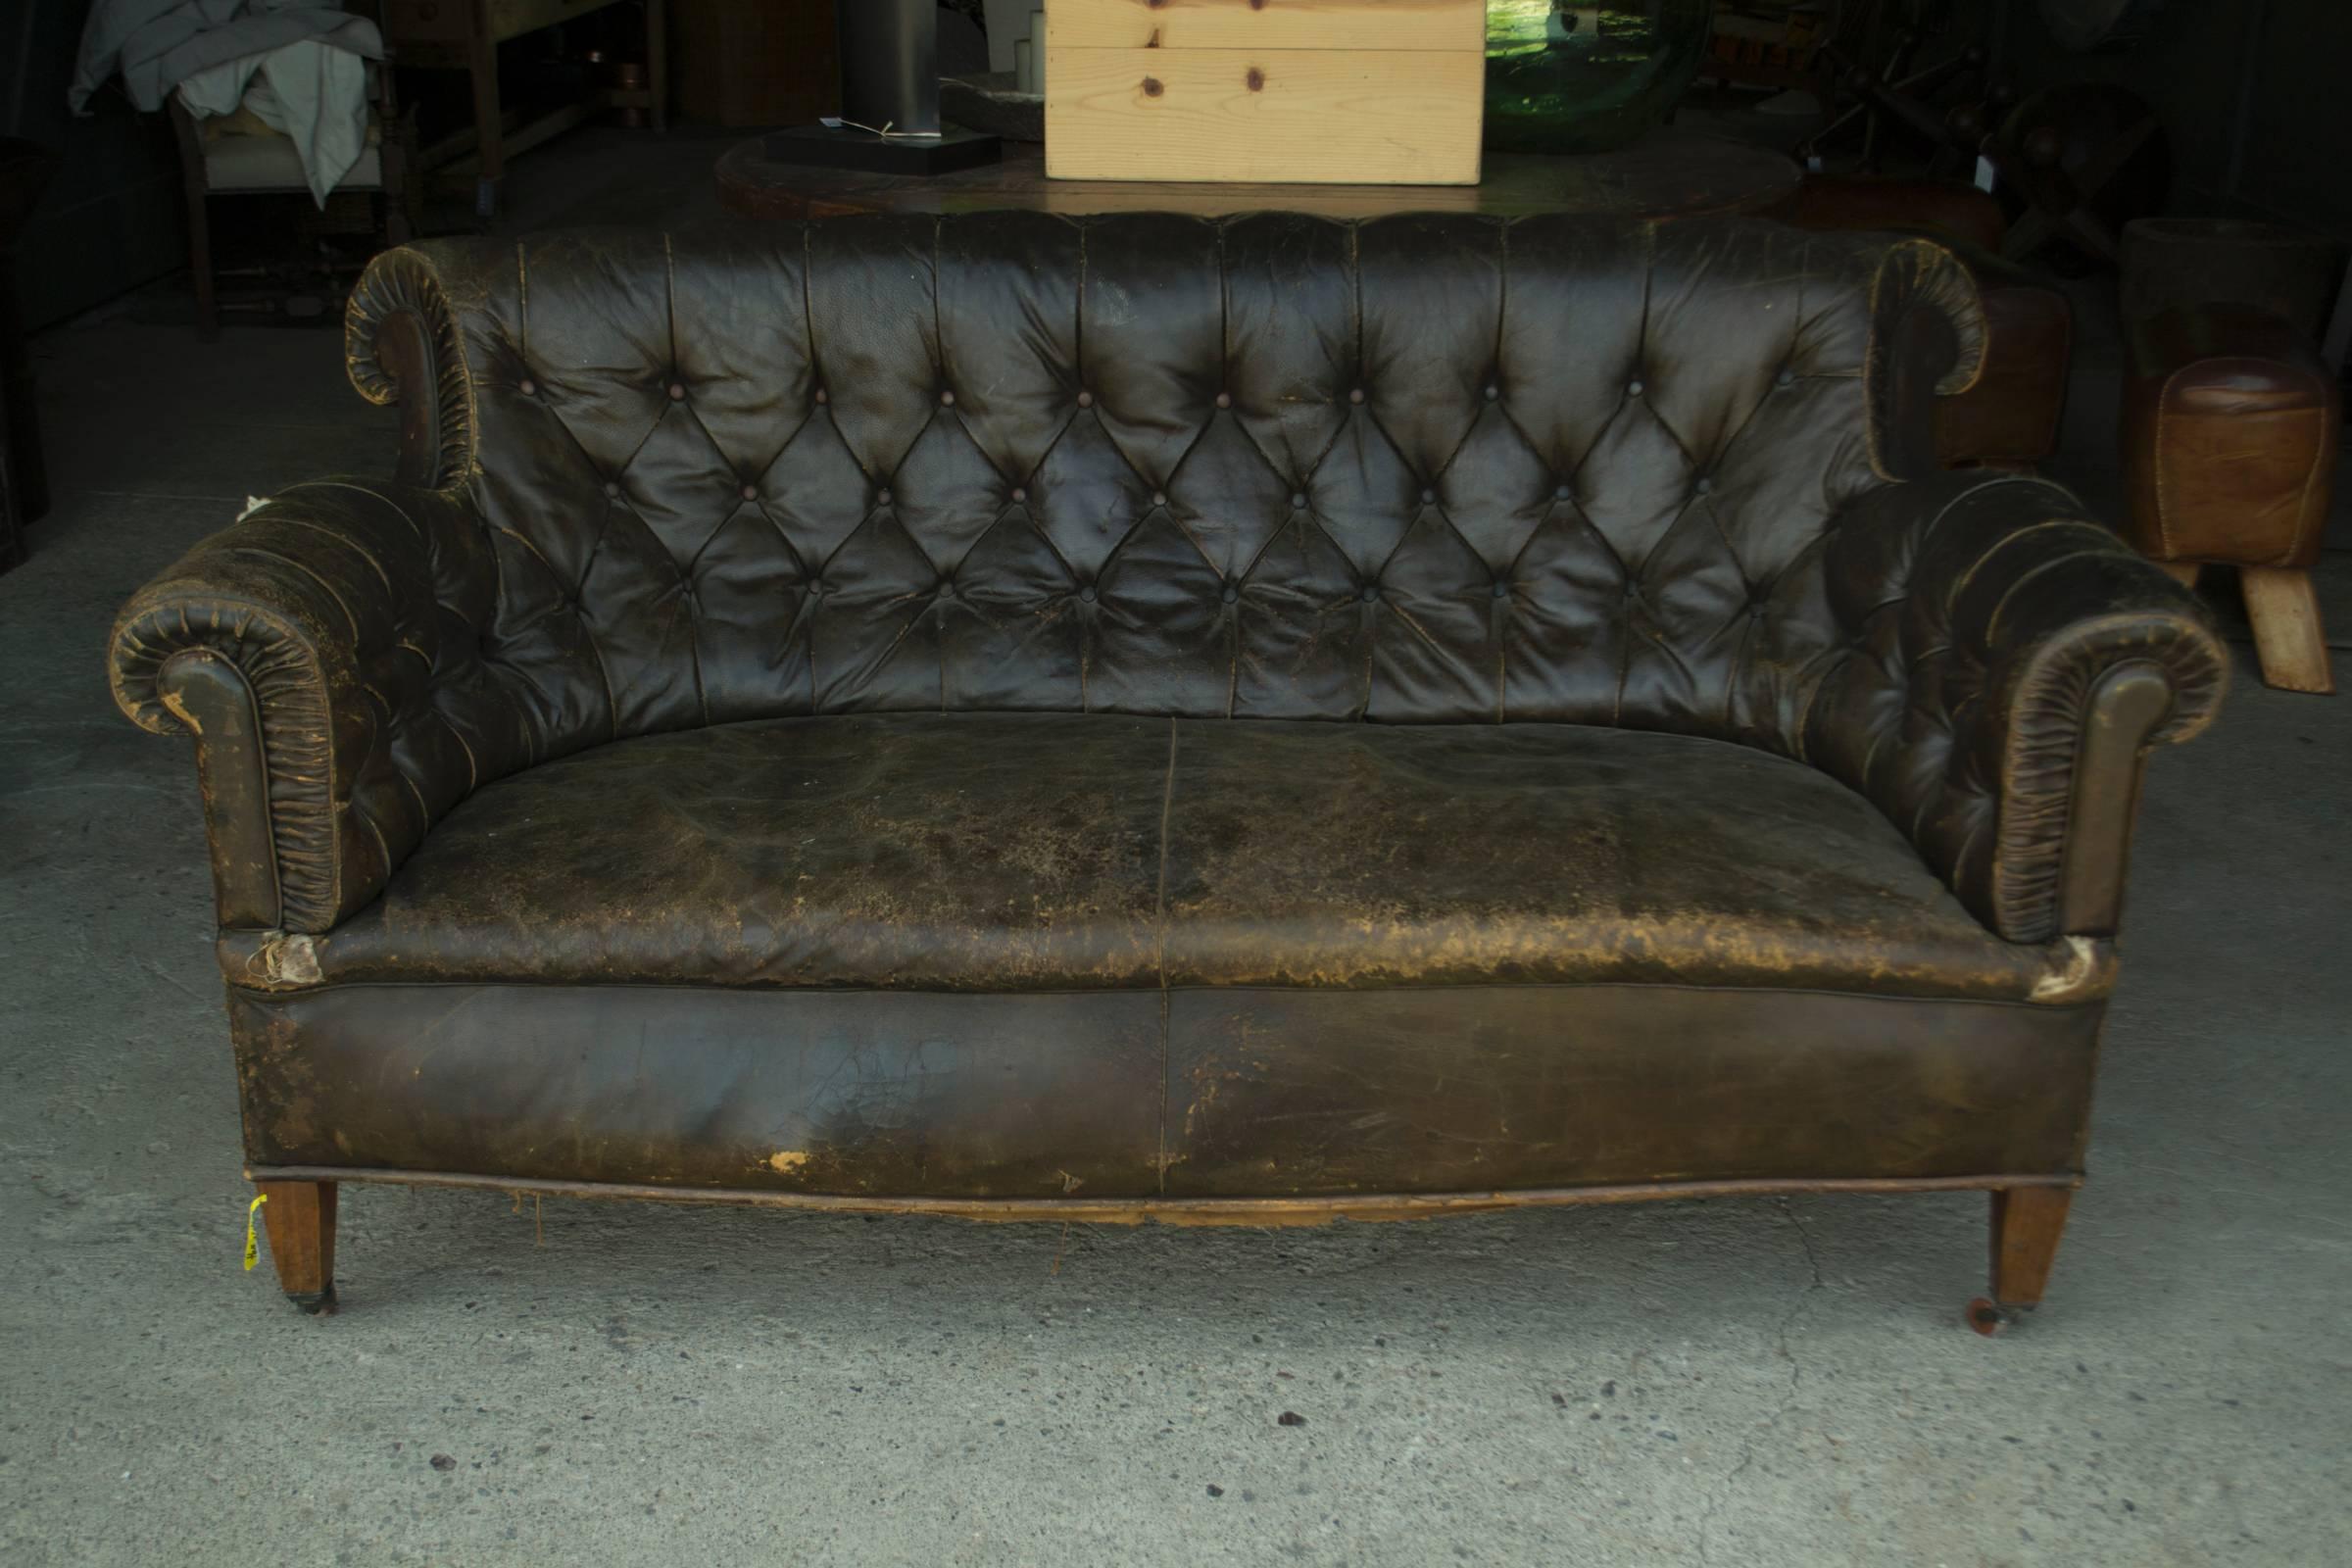 Vintage leadther Chesterfield sofa on caster. Vintage item; please see images detail of wear and tear.